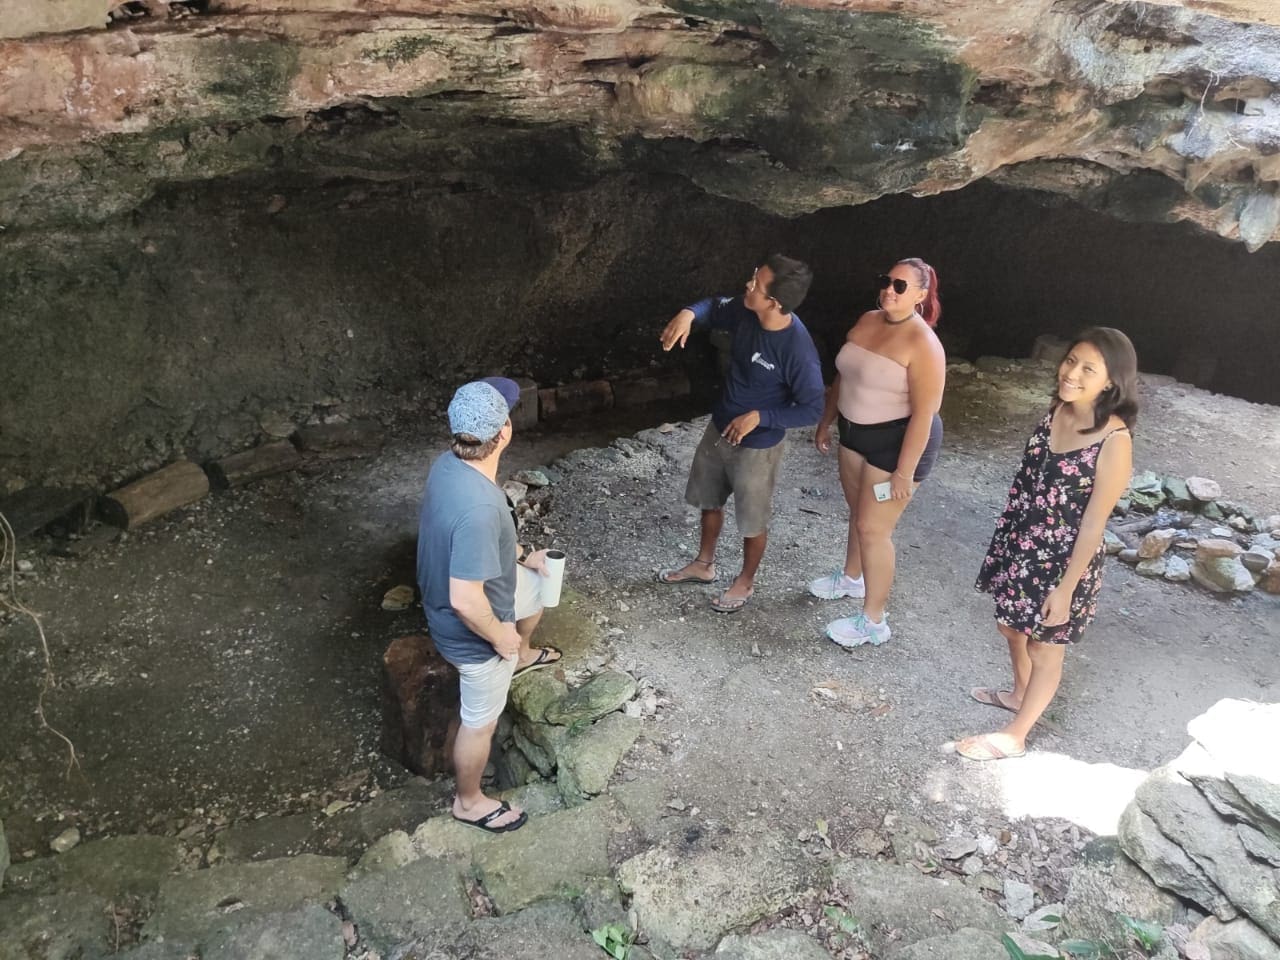 Cozumel cave and ruin exploration